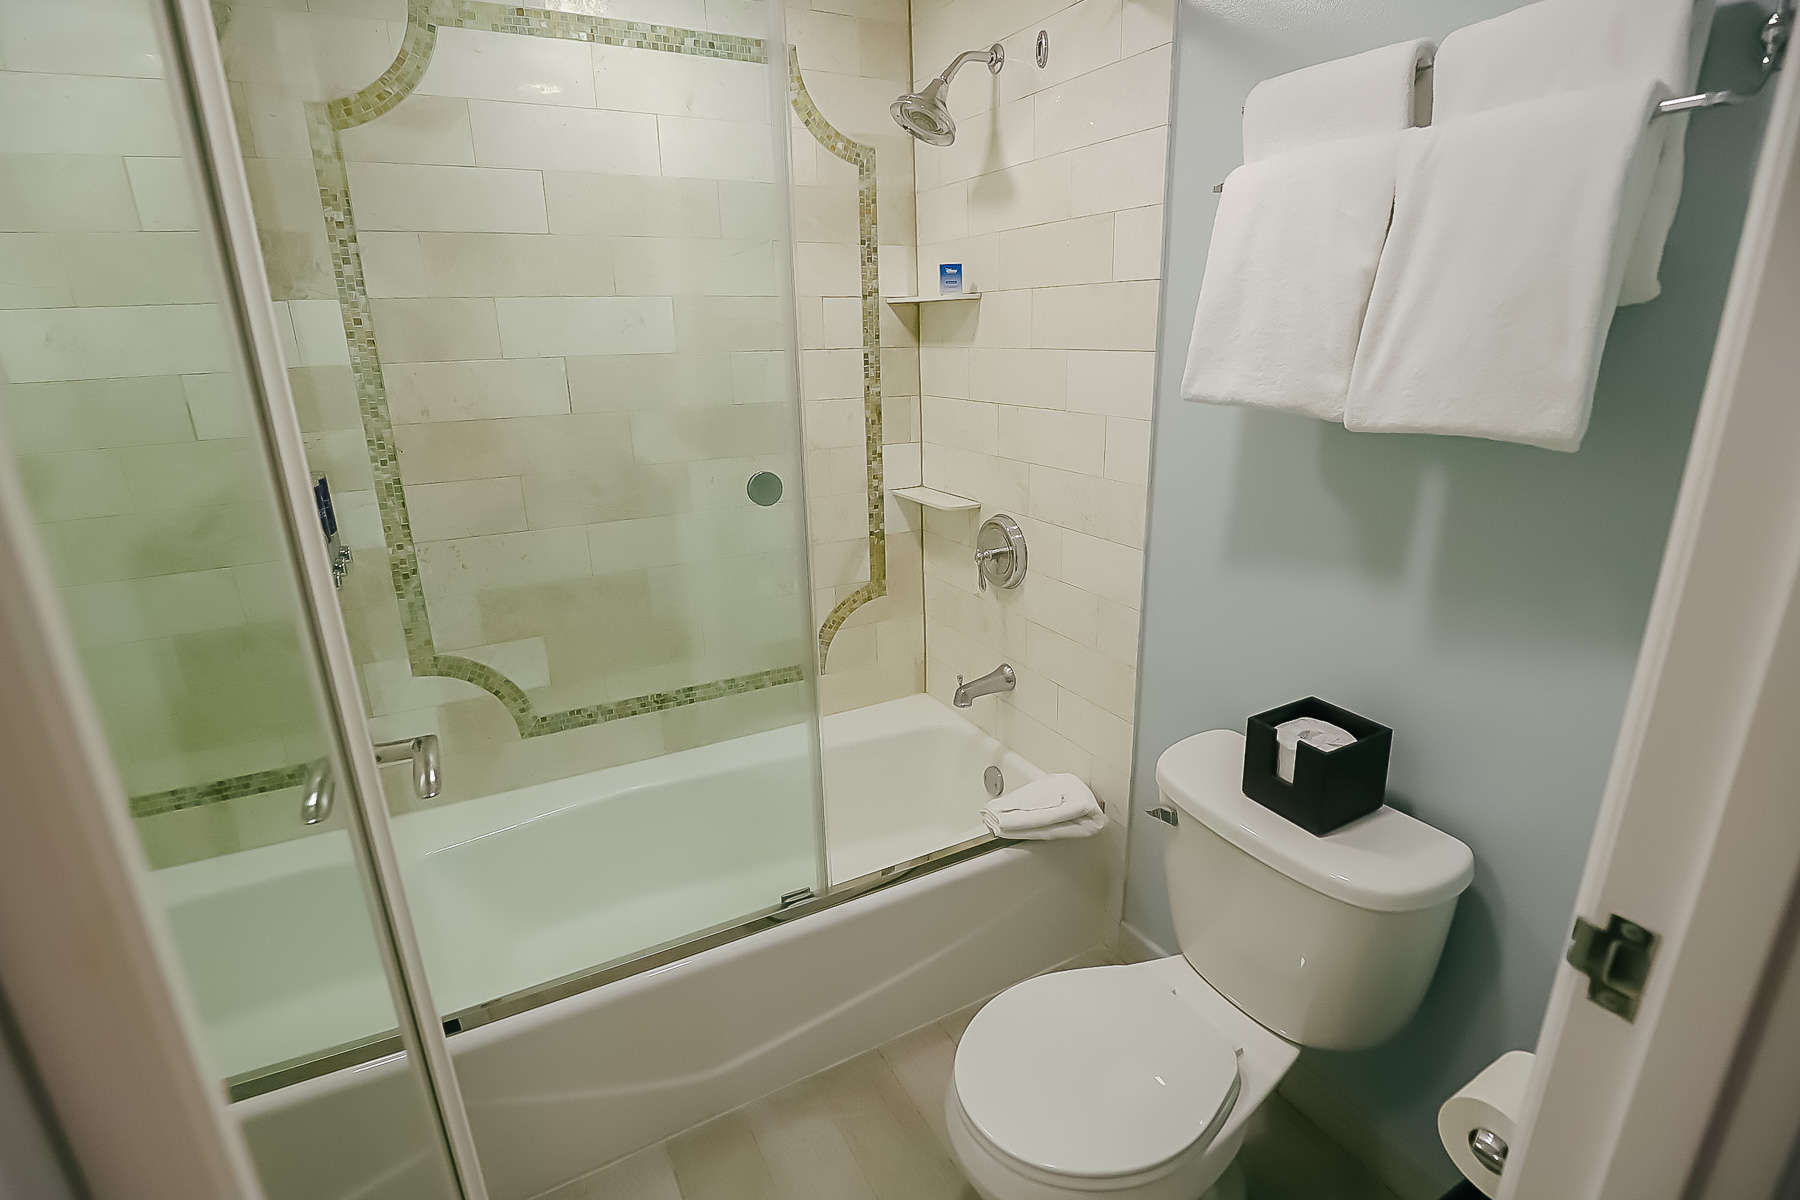 the toilet and tub with shower combination are in a separate water closet 